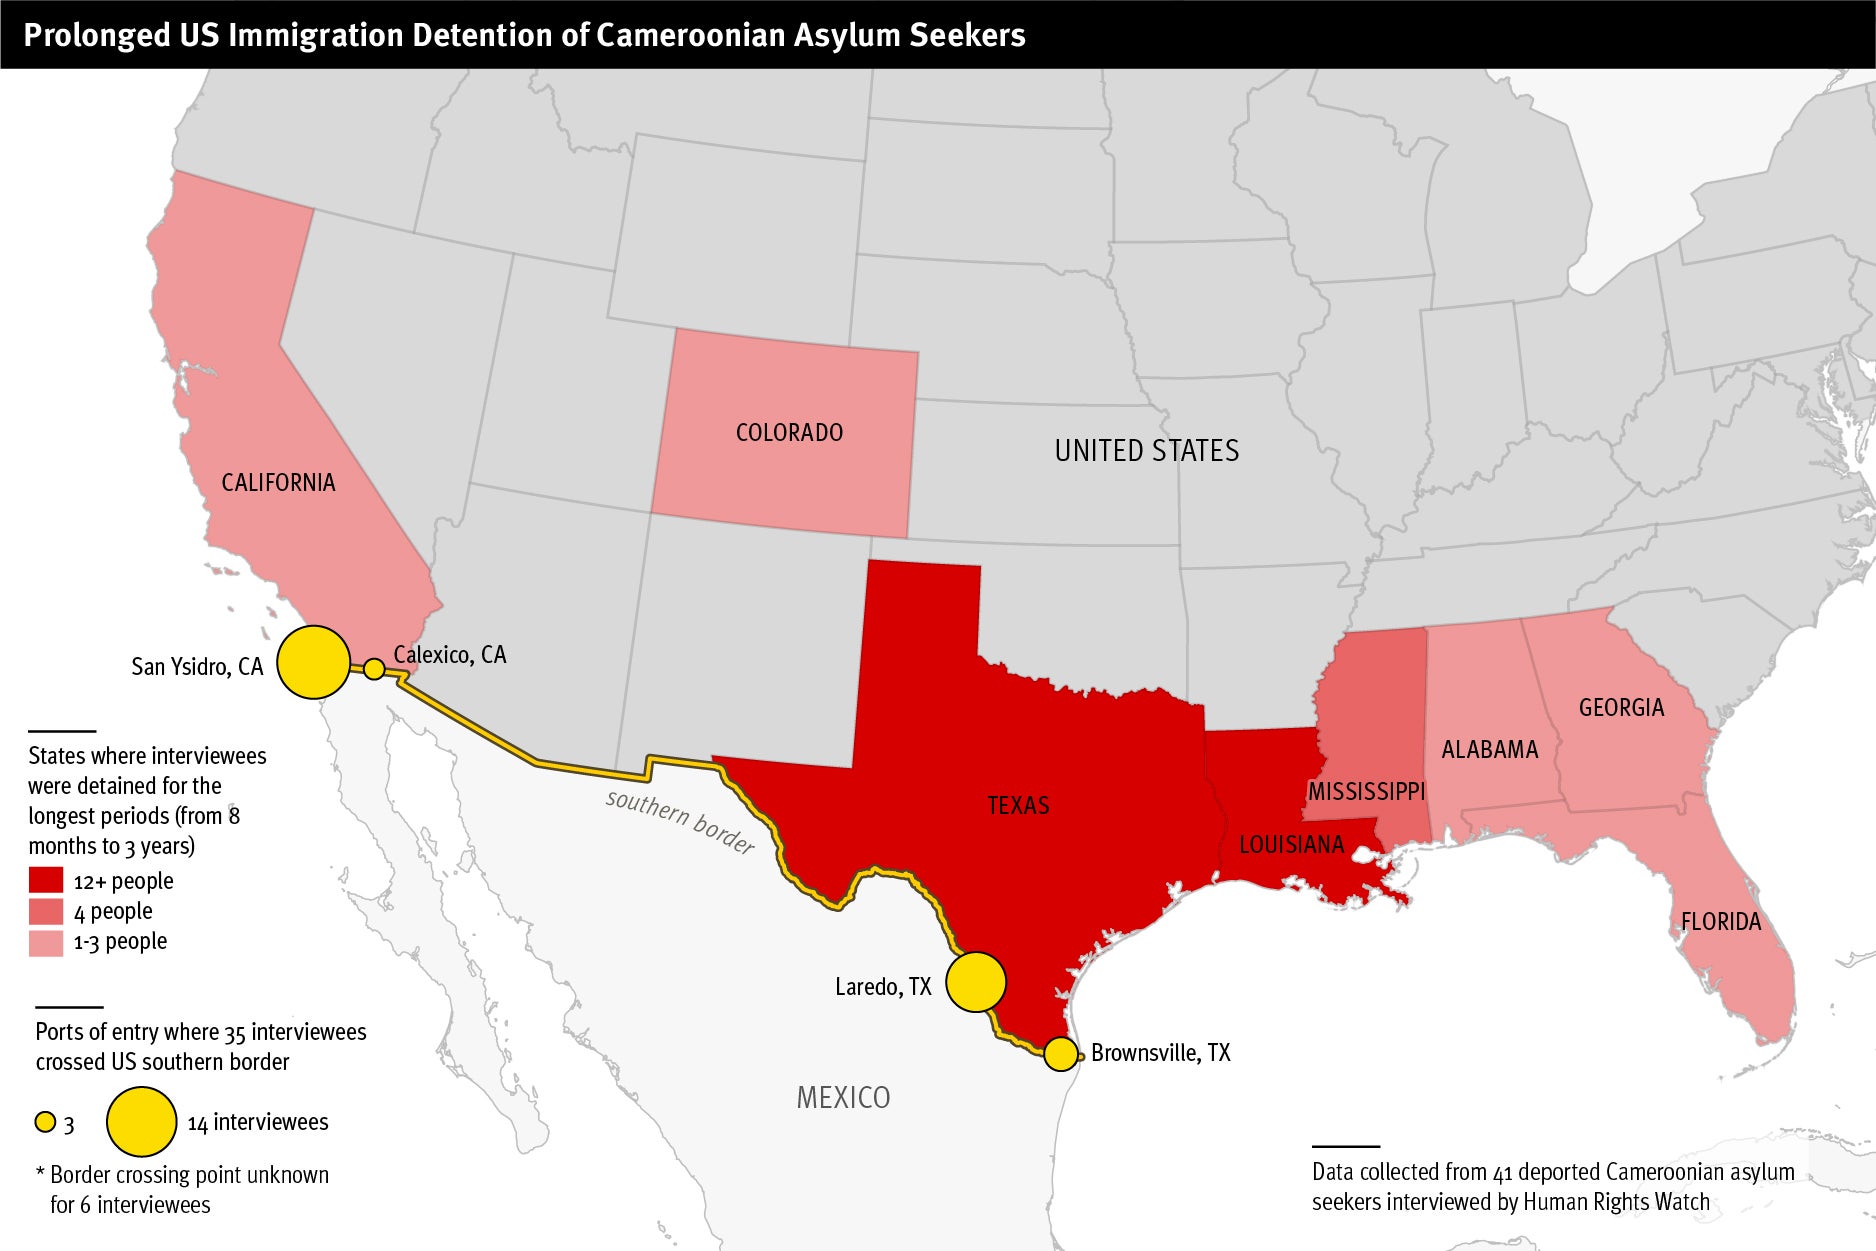 Map of the US showing detention sites